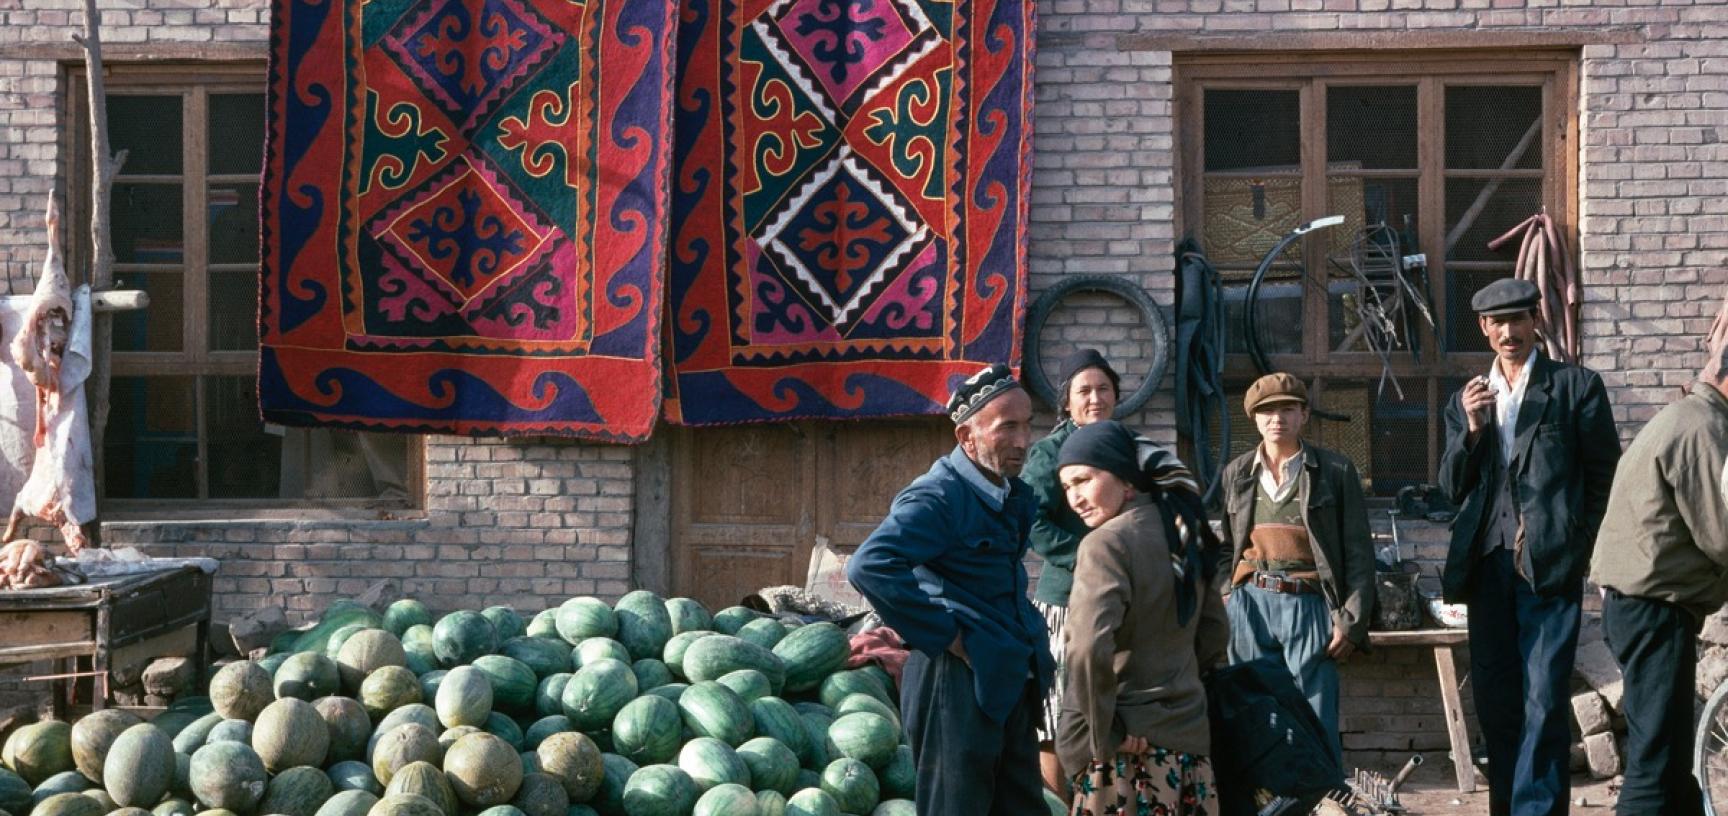 People at a market stall selling watermelons